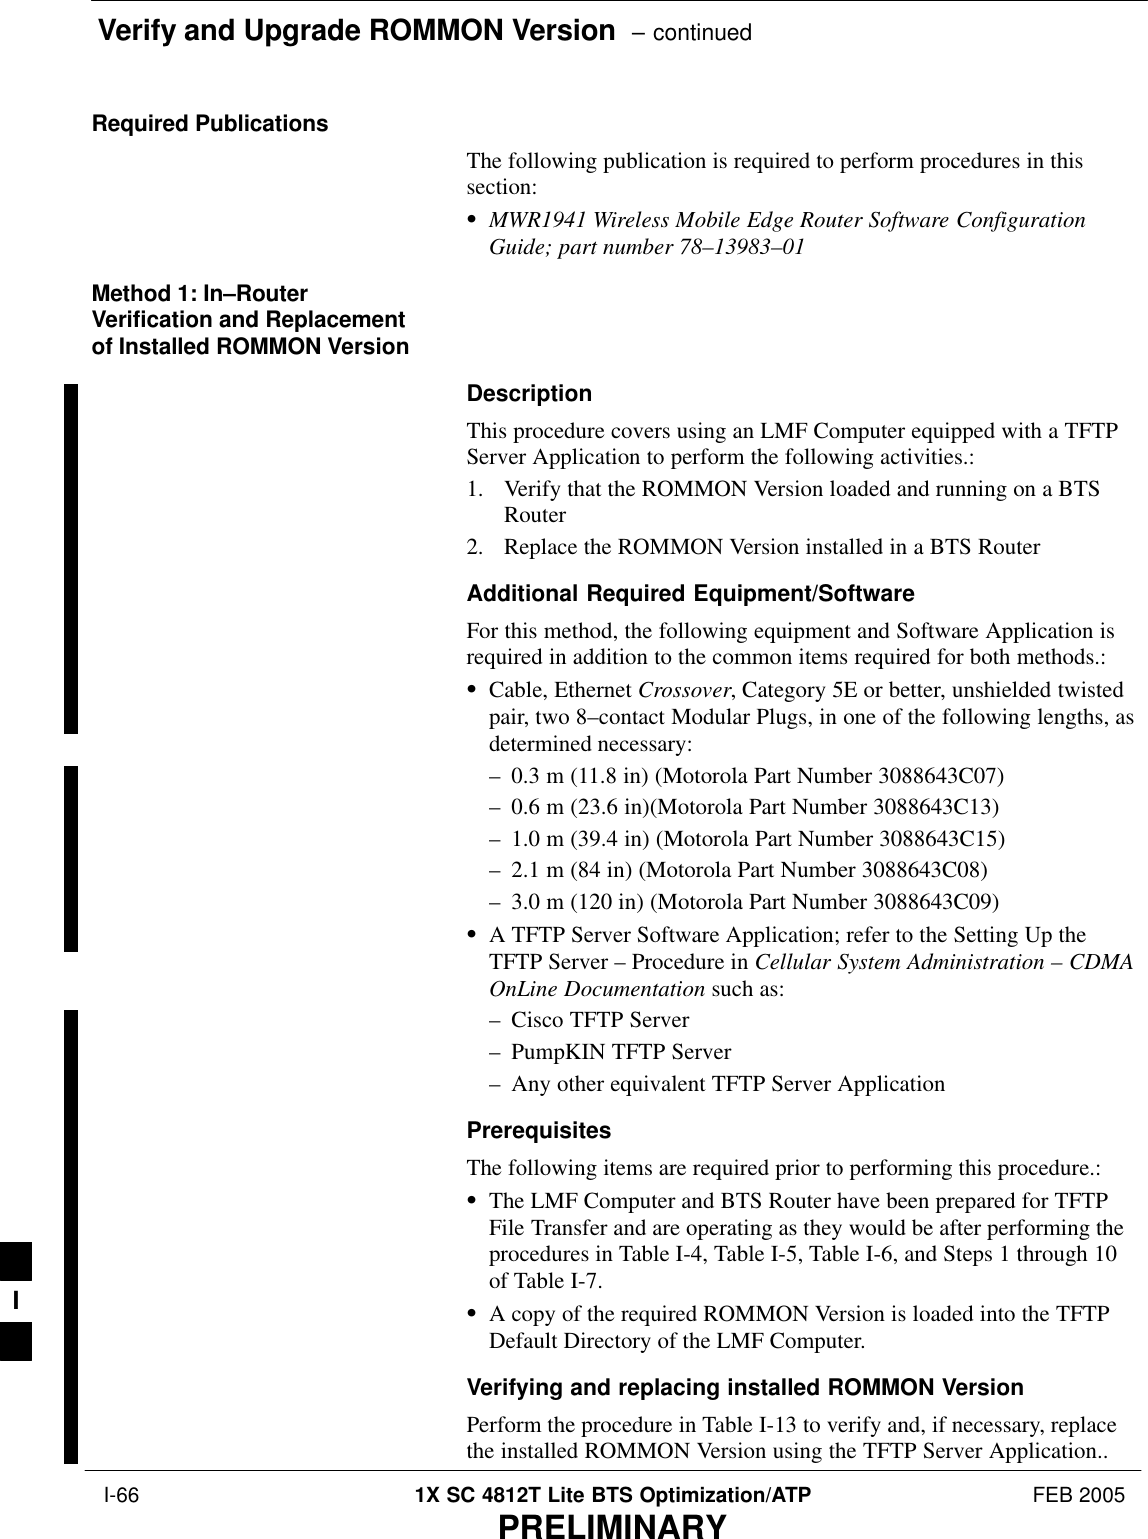 Verify and Upgrade ROMMON Version  – continued I-66 1X SC 4812T Lite BTS Optimization/ATP FEB 2005PRELIMINARYRequired PublicationsThe following publication is required to perform procedures in thissection:SMWR1941 Wireless Mobile Edge Router Software ConfigurationGuide; part number 78–13983–01Method 1: In–RouterVerification and Replacementof Installed ROMMON VersionDescriptionThis procedure covers using an LMF Computer equipped with a TFTPServer Application to perform the following activities.:1. Verify that the ROMMON Version loaded and running on a BTSRouter2. Replace the ROMMON Version installed in a BTS RouterAdditional Required Equipment/SoftwareFor this method, the following equipment and Software Application isrequired in addition to the common items required for both methods.:SCable, Ethernet Crossover, Category 5E or better, unshielded twistedpair, two 8–contact Modular Plugs, in one of the following lengths, asdetermined necessary:– 0.3 m (11.8 in) (Motorola Part Number 3088643C07)– 0.6 m (23.6 in)(Motorola Part Number 3088643C13)– 1.0 m (39.4 in) (Motorola Part Number 3088643C15)– 2.1 m (84 in) (Motorola Part Number 3088643C08)– 3.0 m (120 in) (Motorola Part Number 3088643C09)SA TFTP Server Software Application; refer to the Setting Up theTFTP Server – Procedure in Cellular System Administration – CDMAOnLine Documentation such as:– Cisco TFTP Server– PumpKIN TFTP Server– Any other equivalent TFTP Server ApplicationPrerequisitesThe following items are required prior to performing this procedure.:SThe LMF Computer and BTS Router have been prepared for TFTPFile Transfer and are operating as they would be after performing theprocedures in Table I-4, Table I-5, Table I-6, and Steps 1 through 10of Table I-7.SA copy of the required ROMMON Version is loaded into the TFTPDefault Directory of the LMF Computer.Verifying and replacing installed ROMMON VersionPerform the procedure in Table I-13 to verify and, if necessary, replacethe installed ROMMON Version using the TFTP Server Application..I